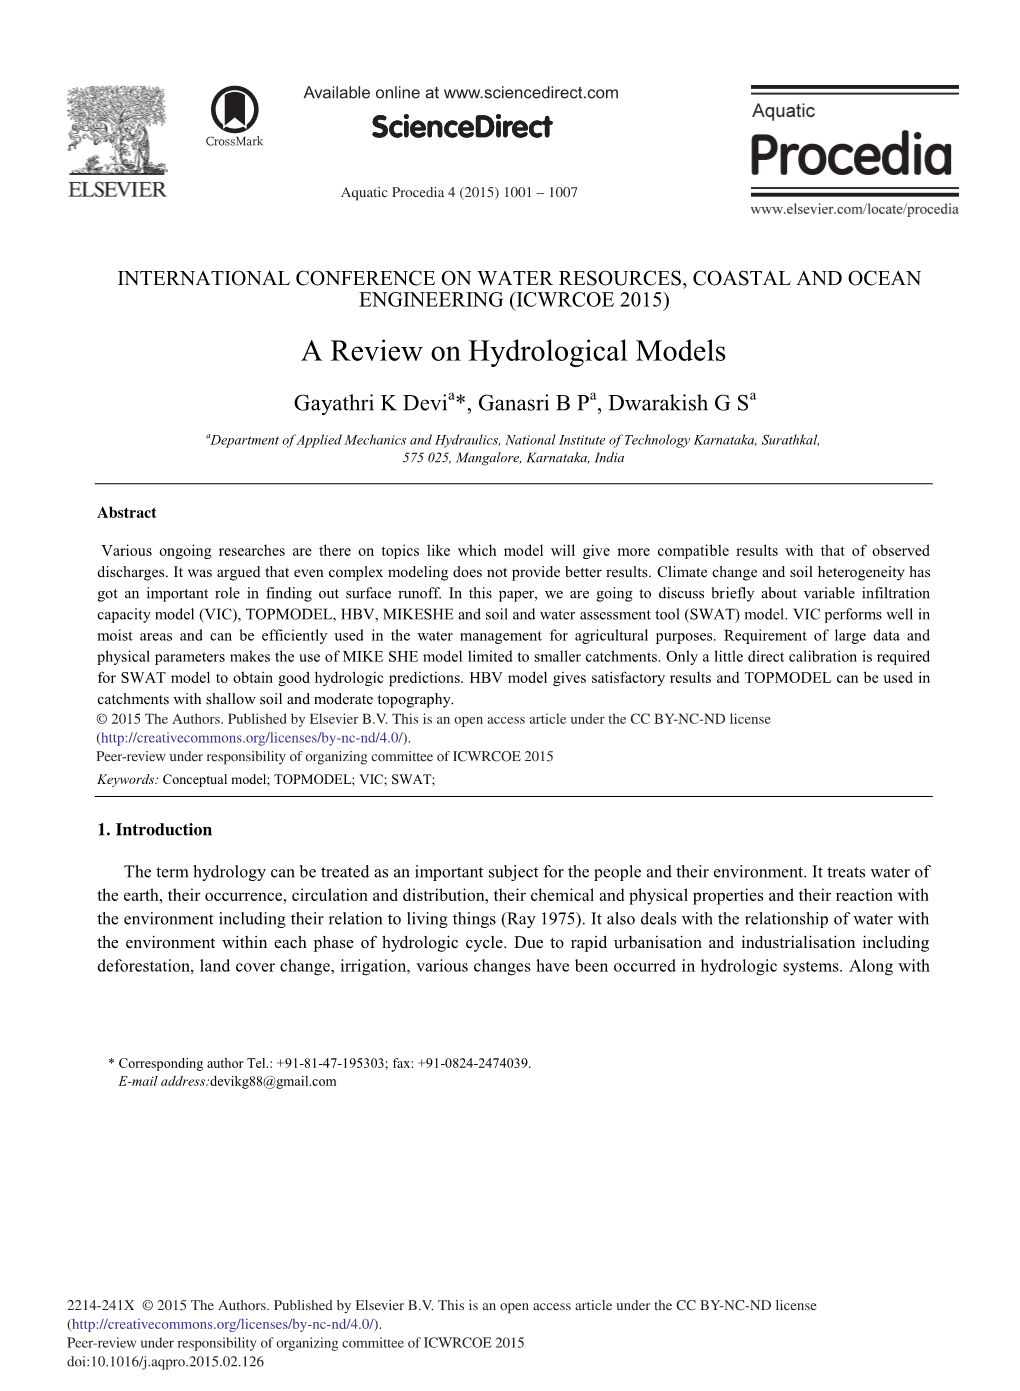 A Review on Hydrological Models